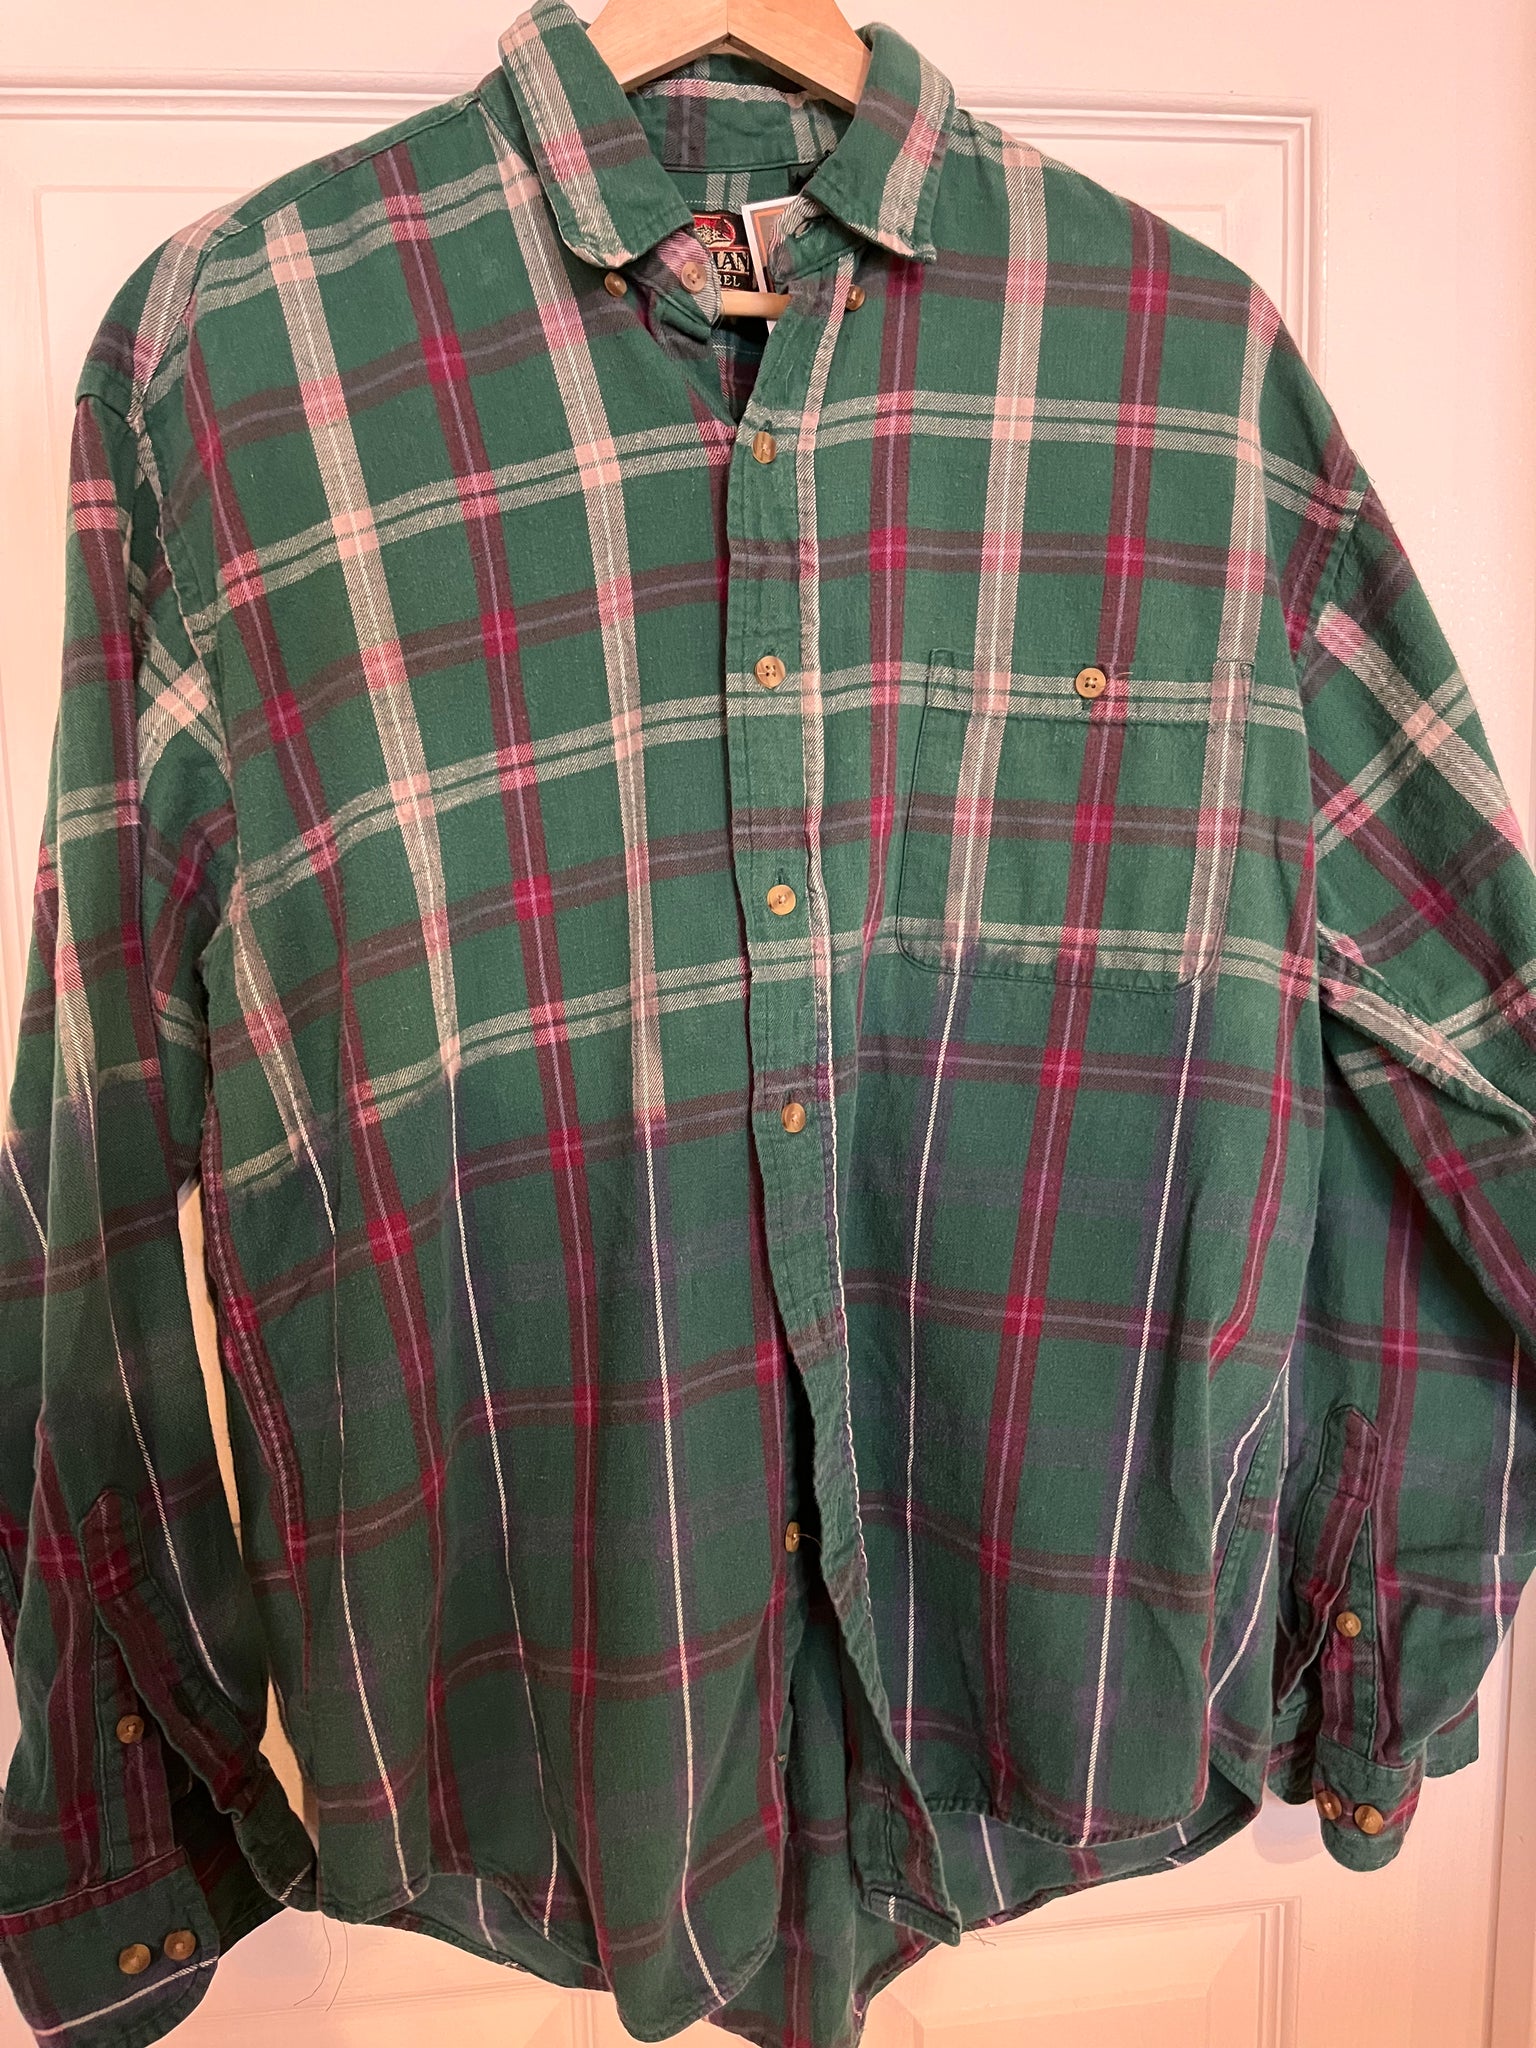 Bleached Flannel - M